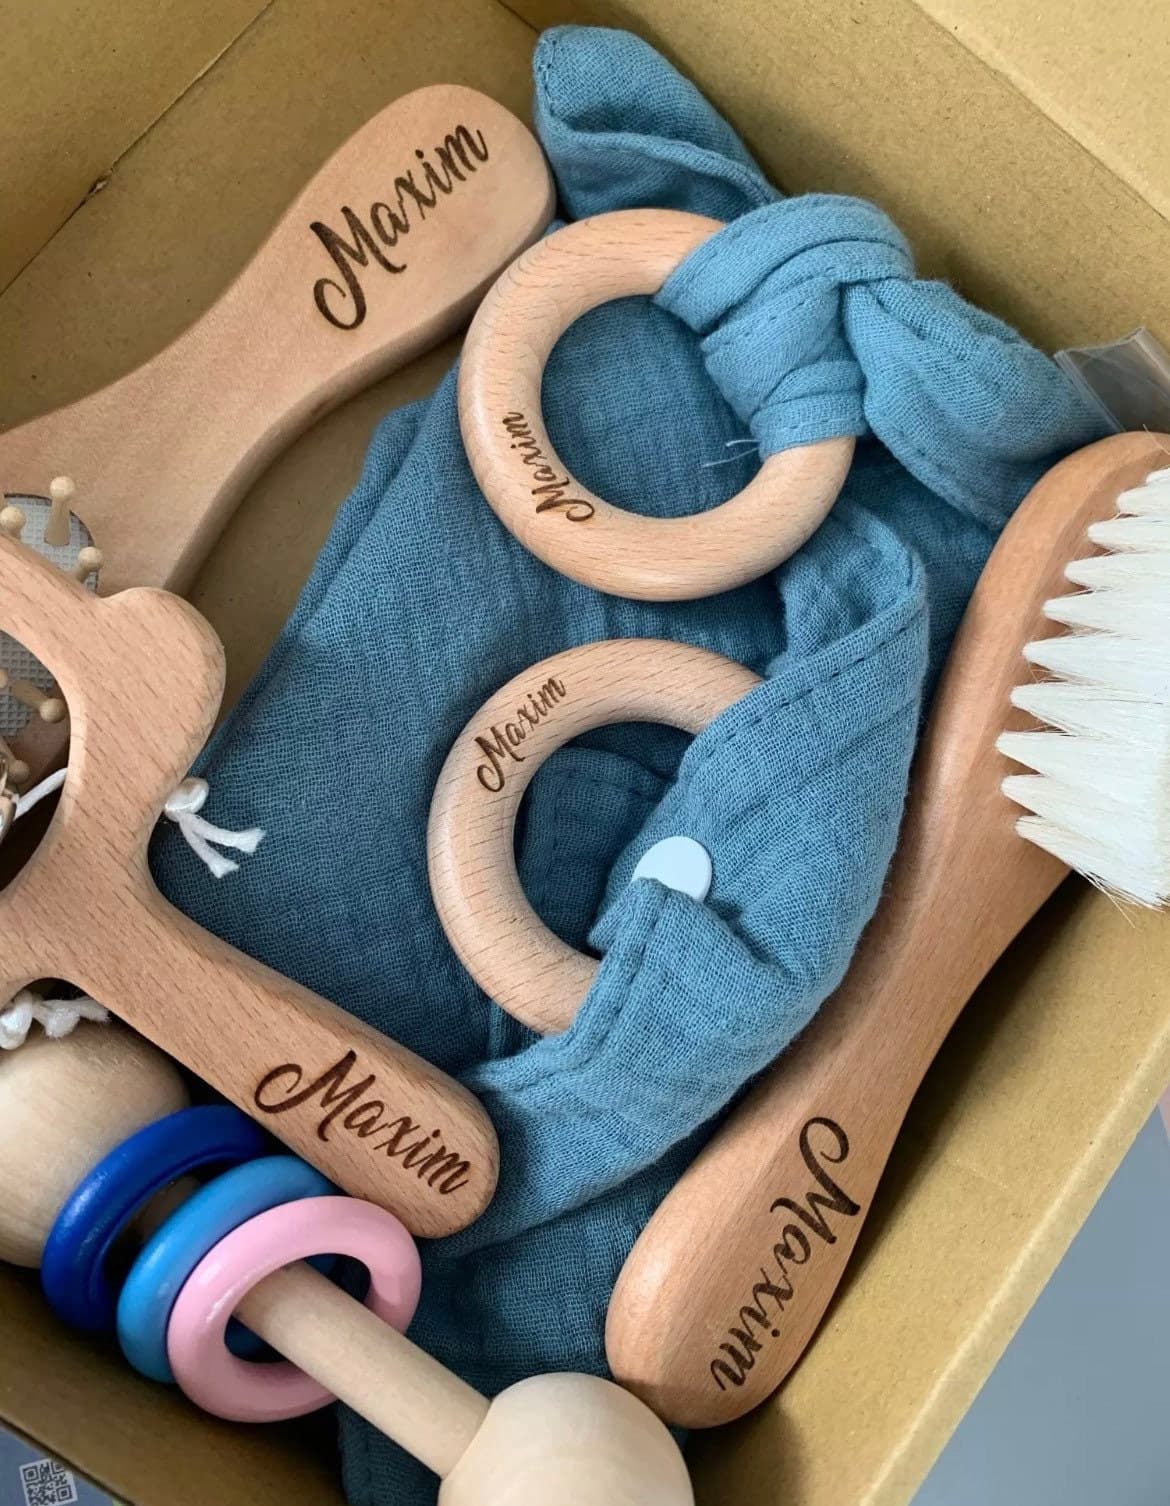 Newborn Baby Hamper | Personalised Baby gift | Personalised Newborn Gi-
 This beautiful hamper has been carefully made and packaged with love for a very special baby girl or boy.This gorgeous hamper includes a muslin cotton swaddle wrap-Bijou Bubs